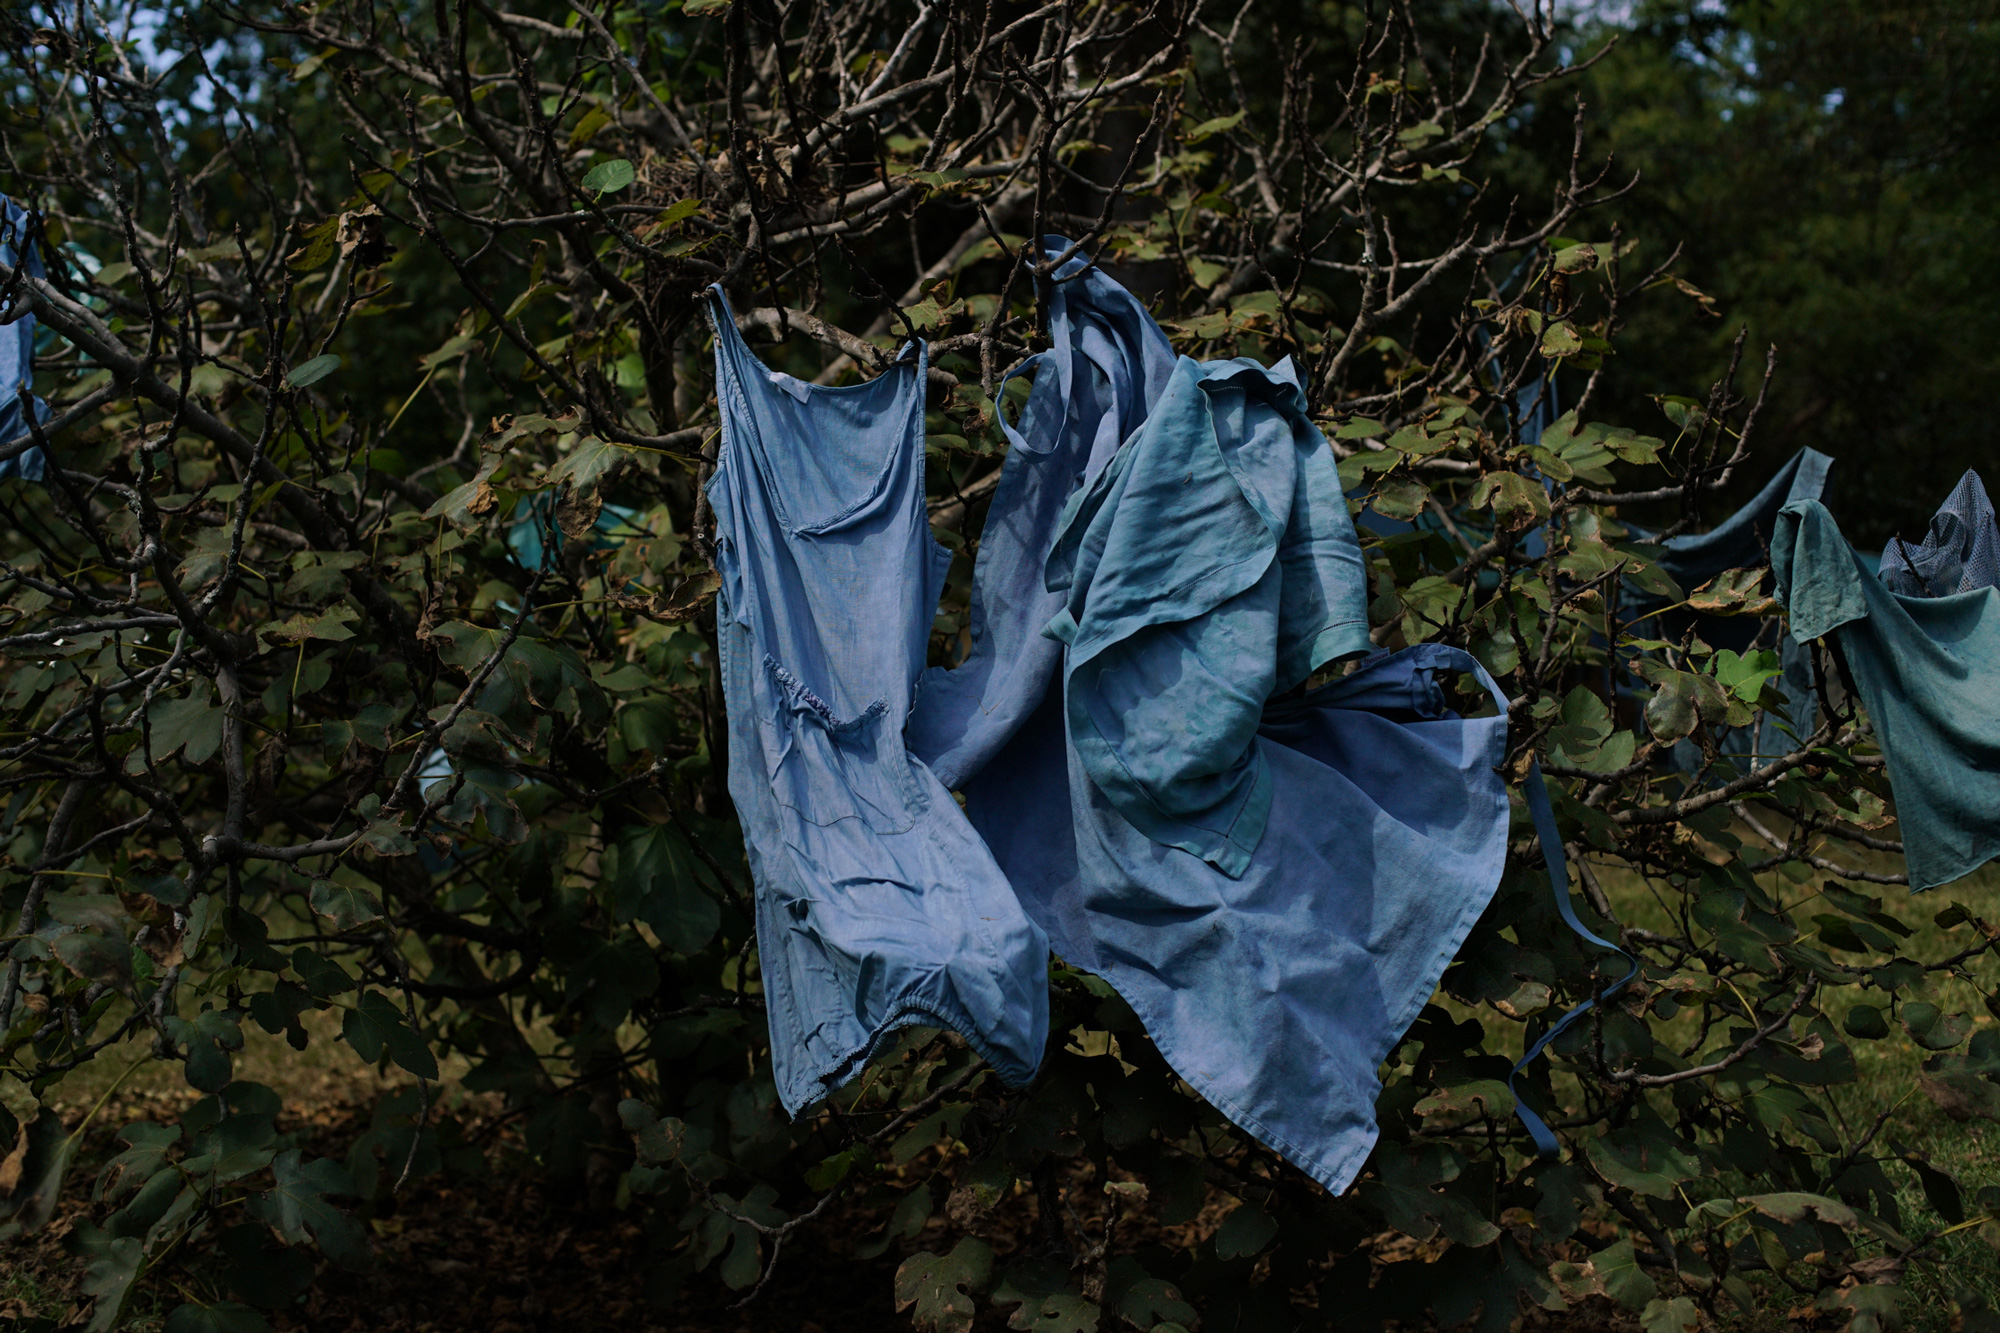 Indigo-dyed garments hanging in trees to dry.